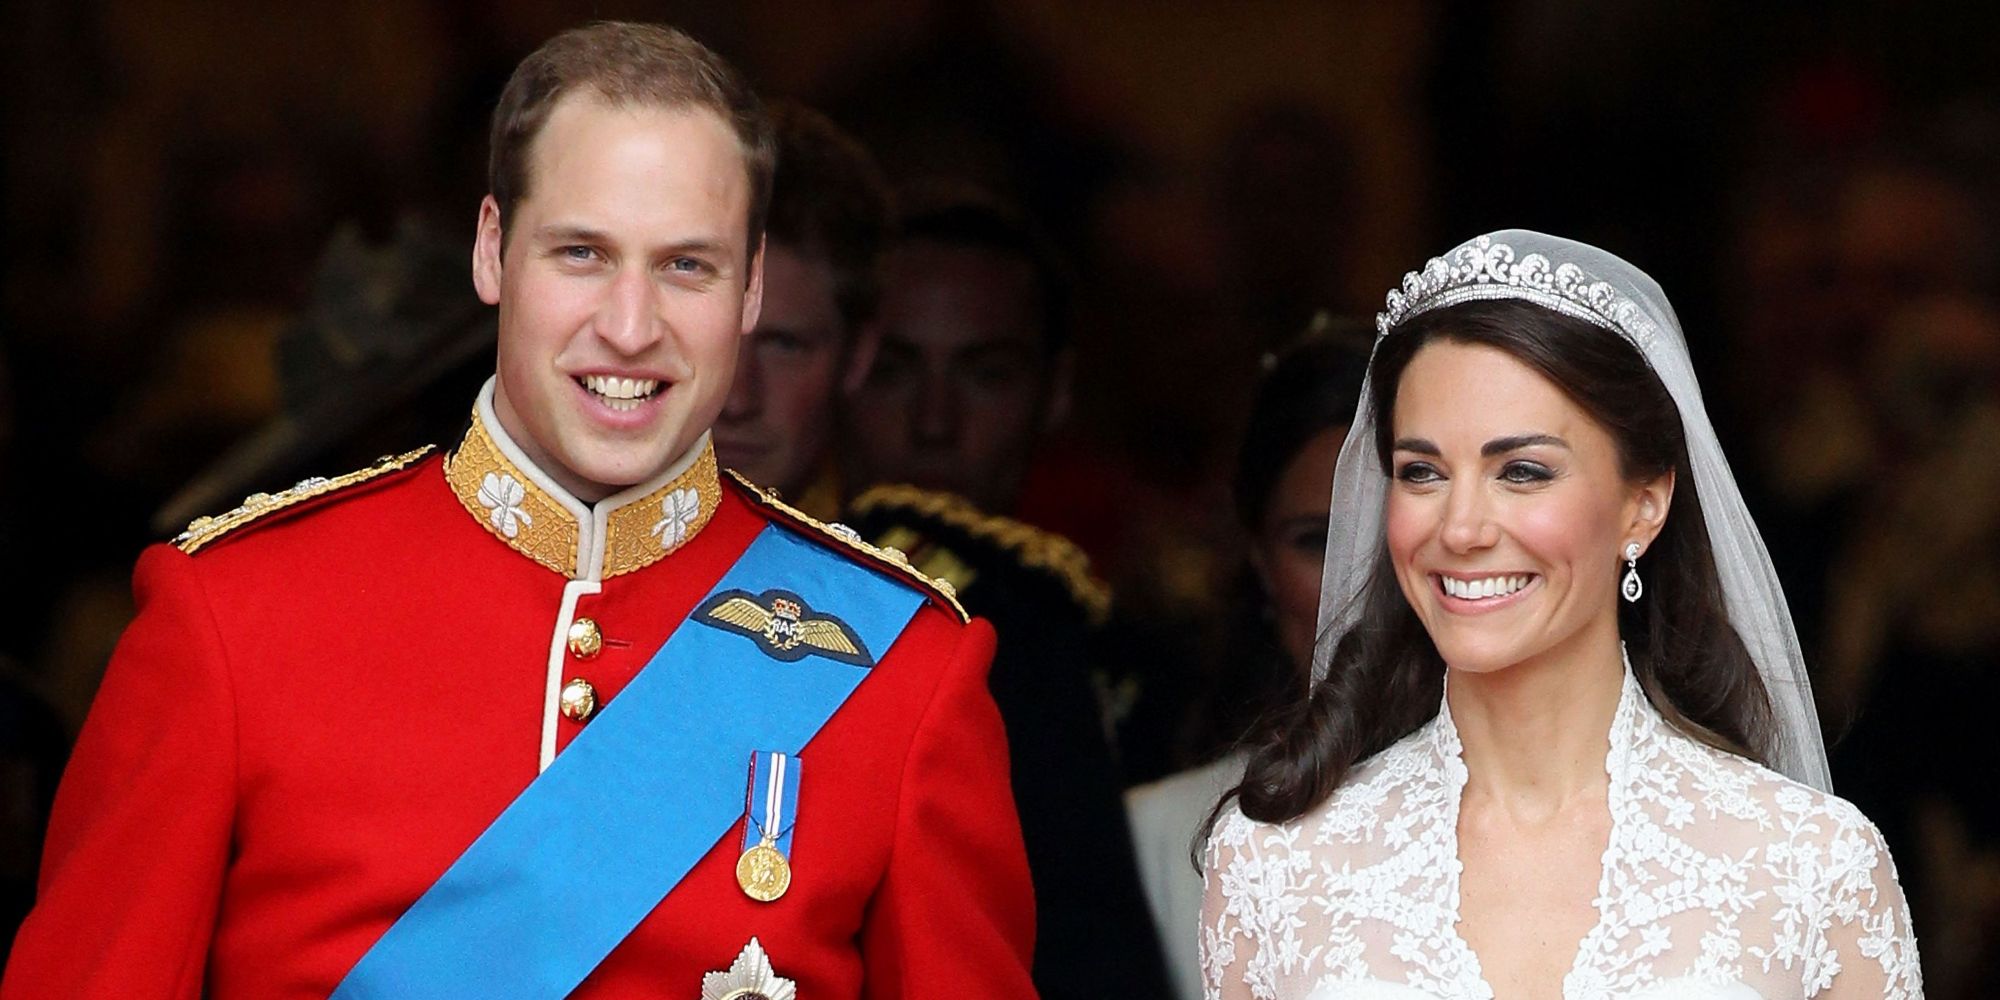 Prince William & Duchess Kate Christmas Card Shows Off Royal Family